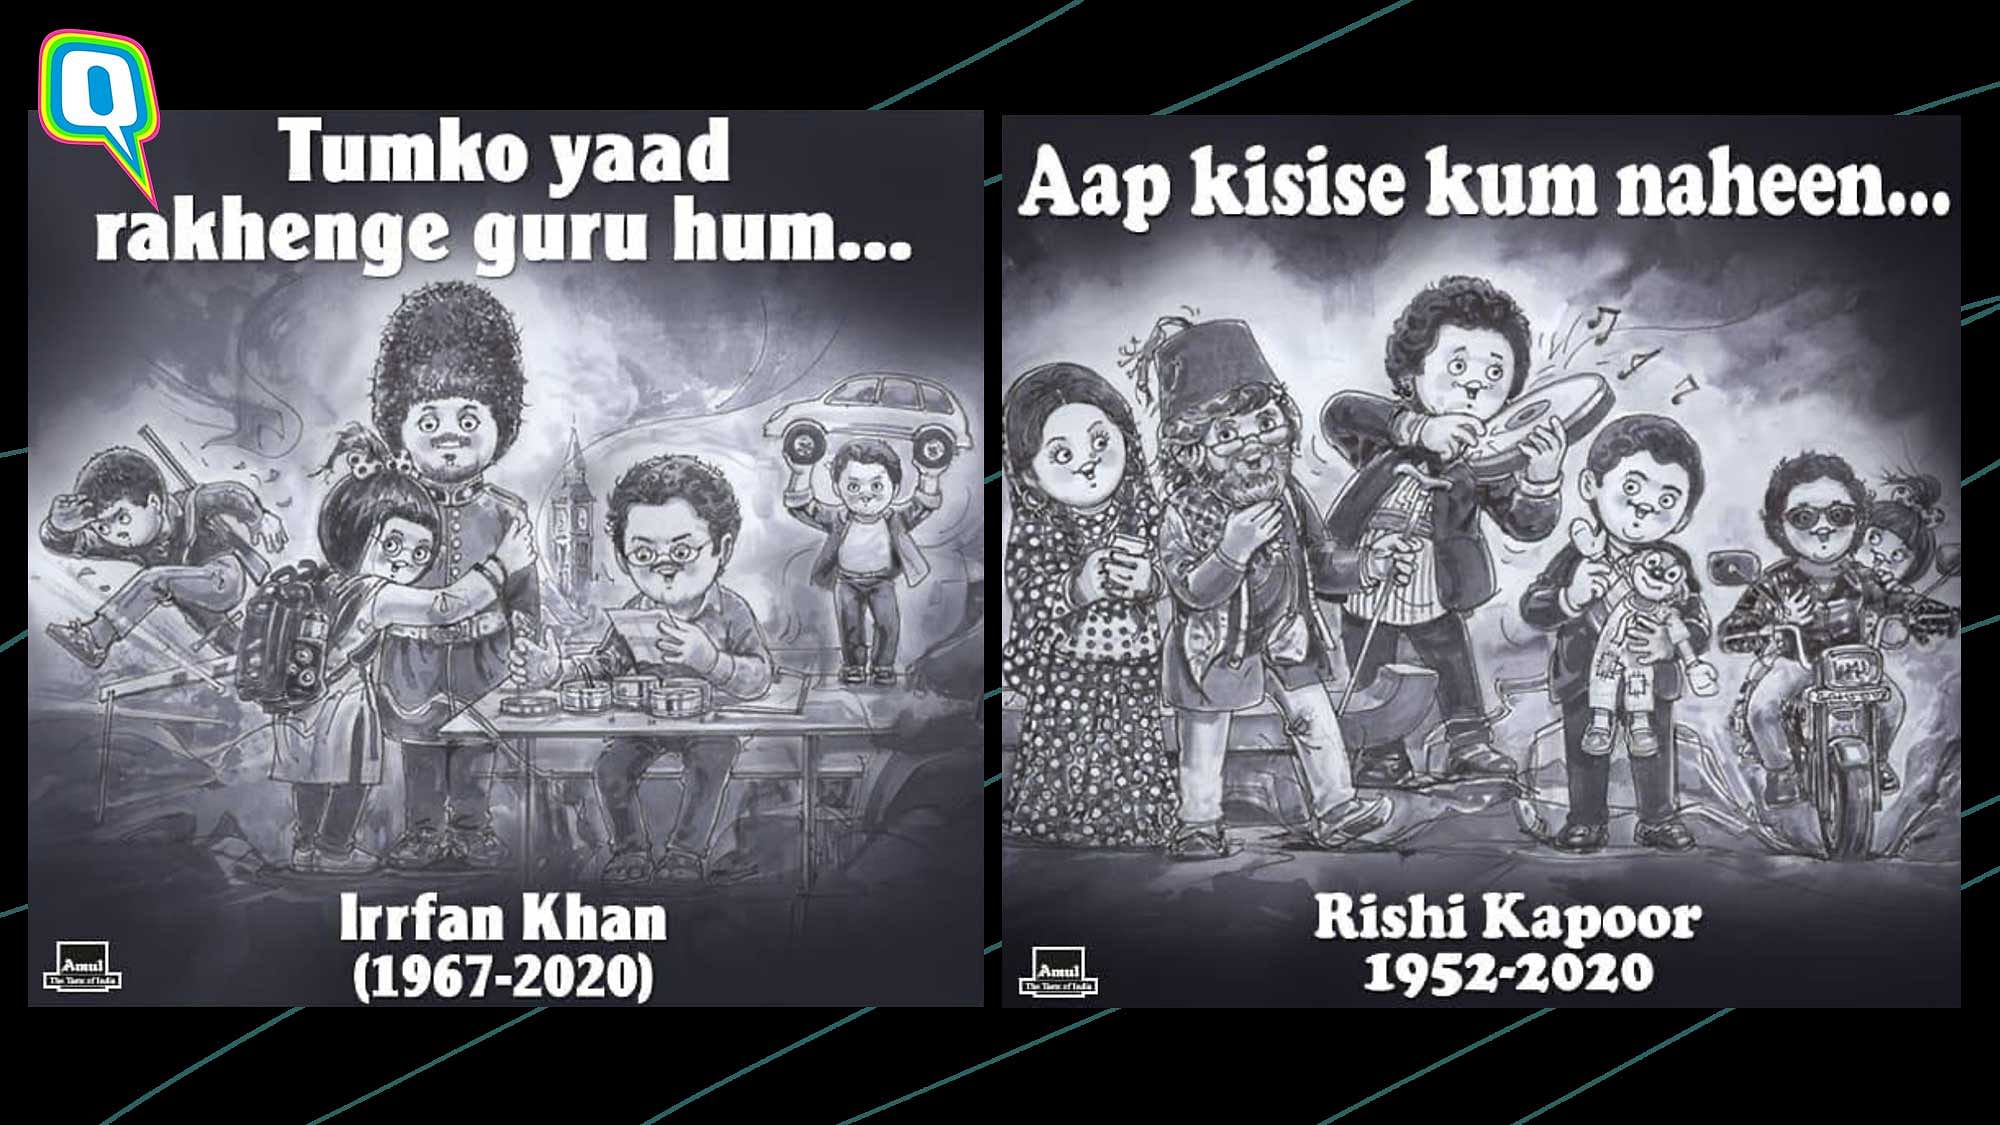 Amul topicals posted a special tribute for Irrfan Khan and Rishi Kapoor